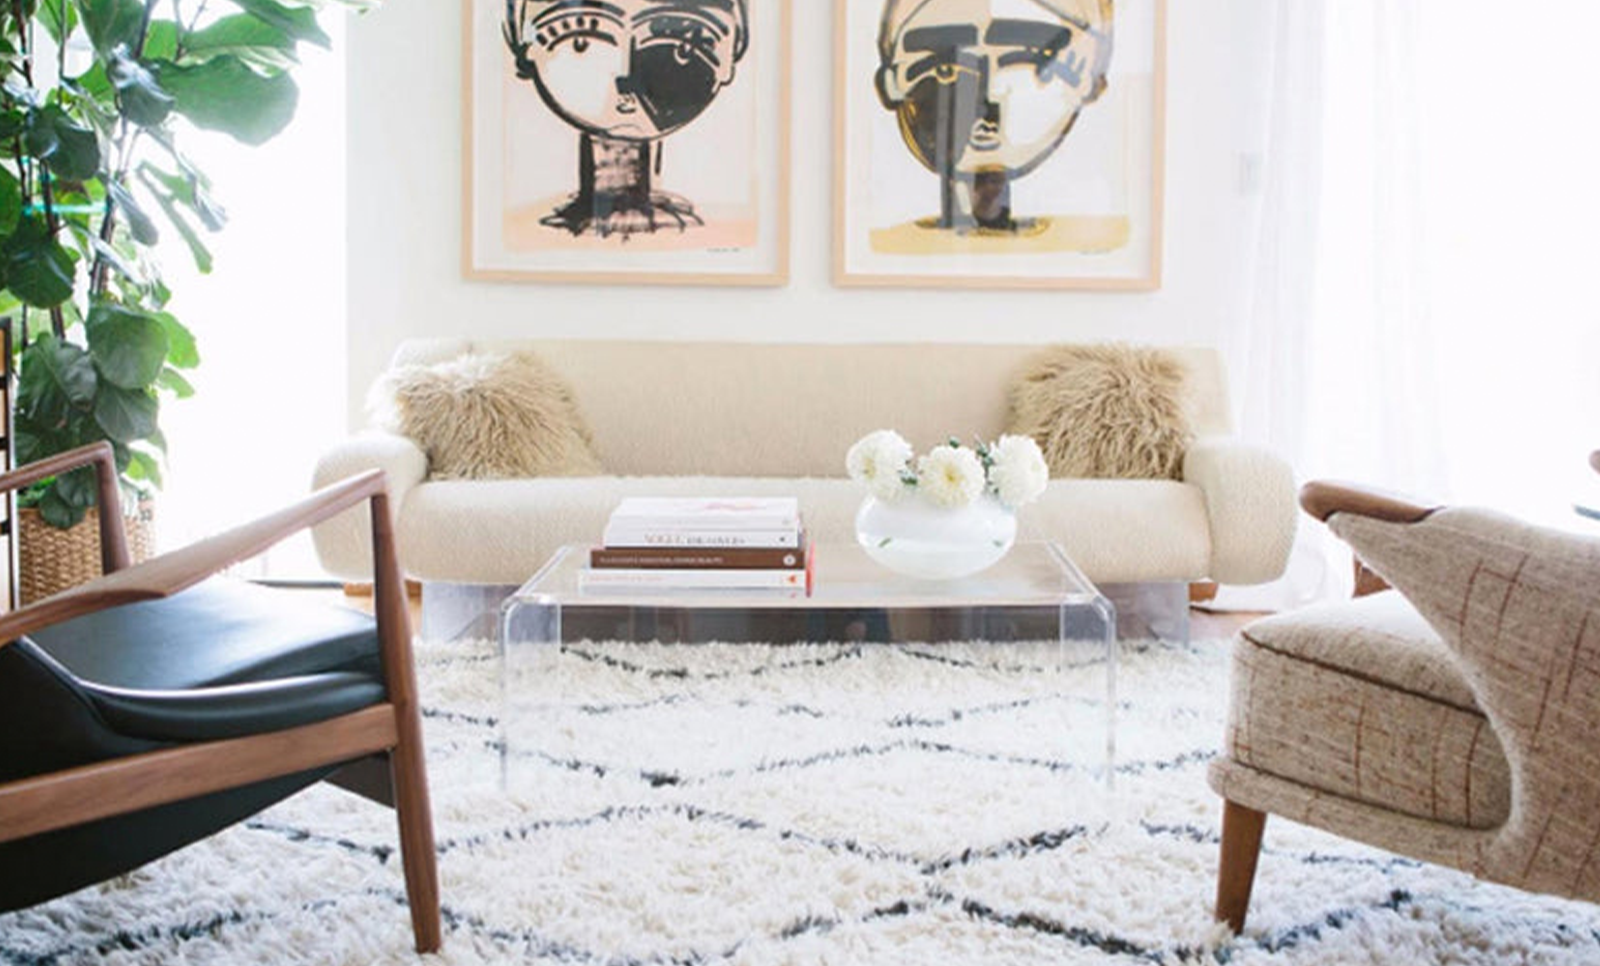 VINTAGE, SHAGGY, CONTEMPORARY : HOW TO CHOOSE THE STYLE OF YOUR MOROCCAN RUG ?